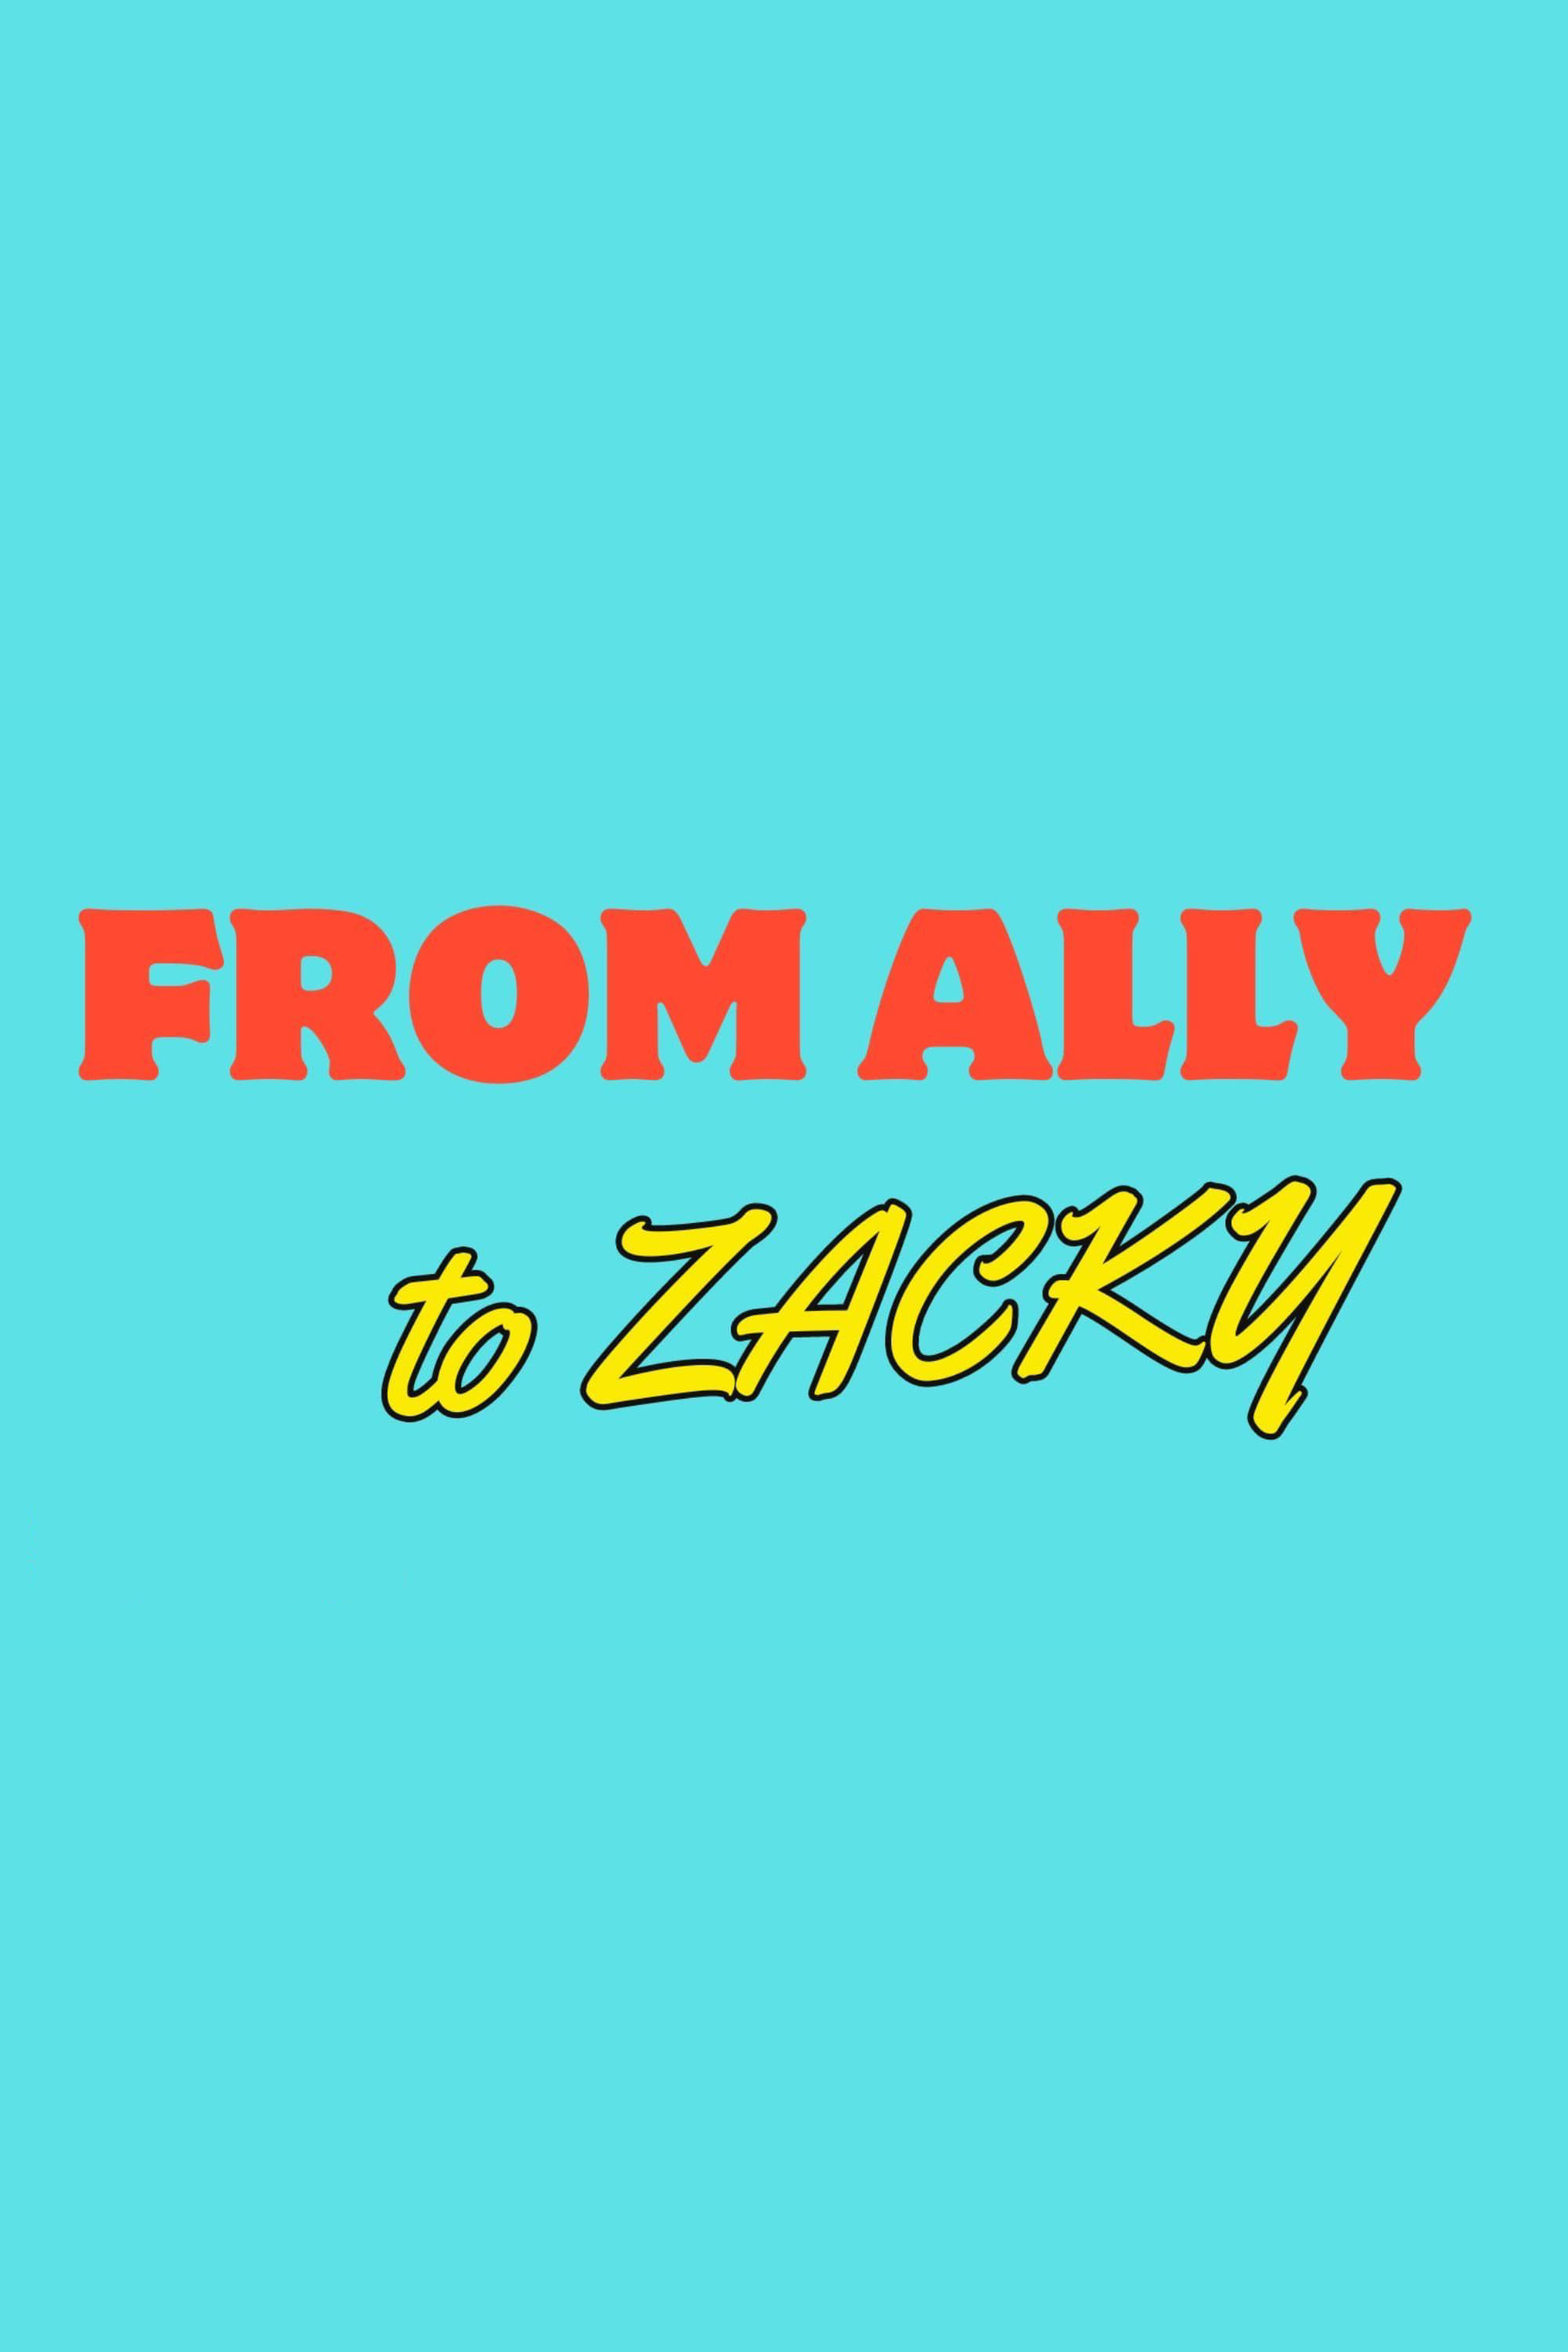 From Ally to Zacky